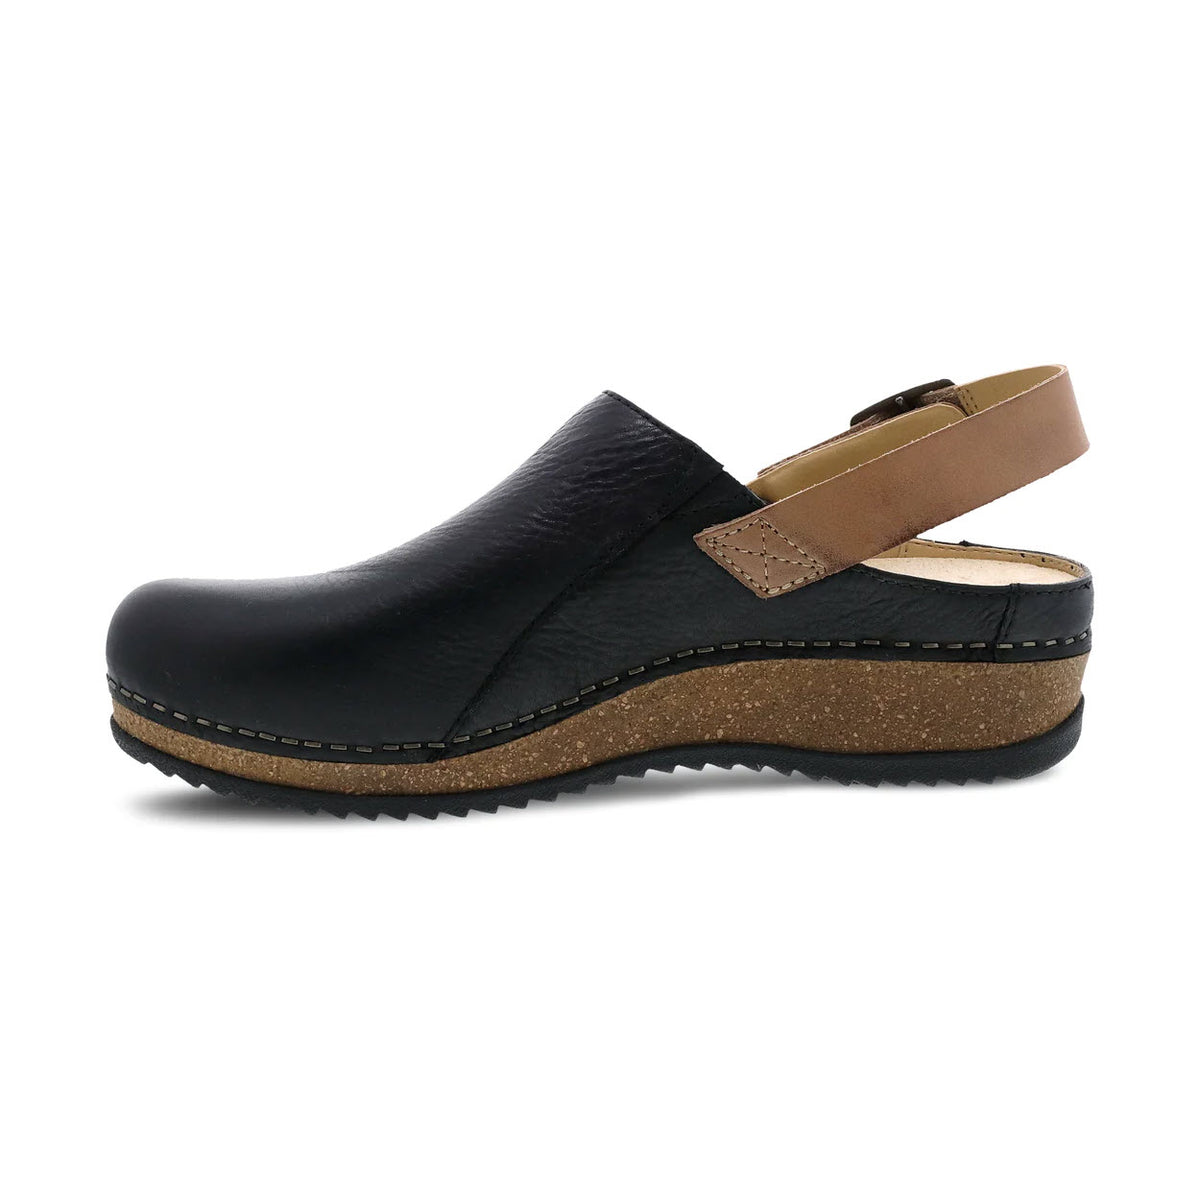 Dansko Merrin Black Waxy clog with sustainable cork platform sole, isolated on a white background.